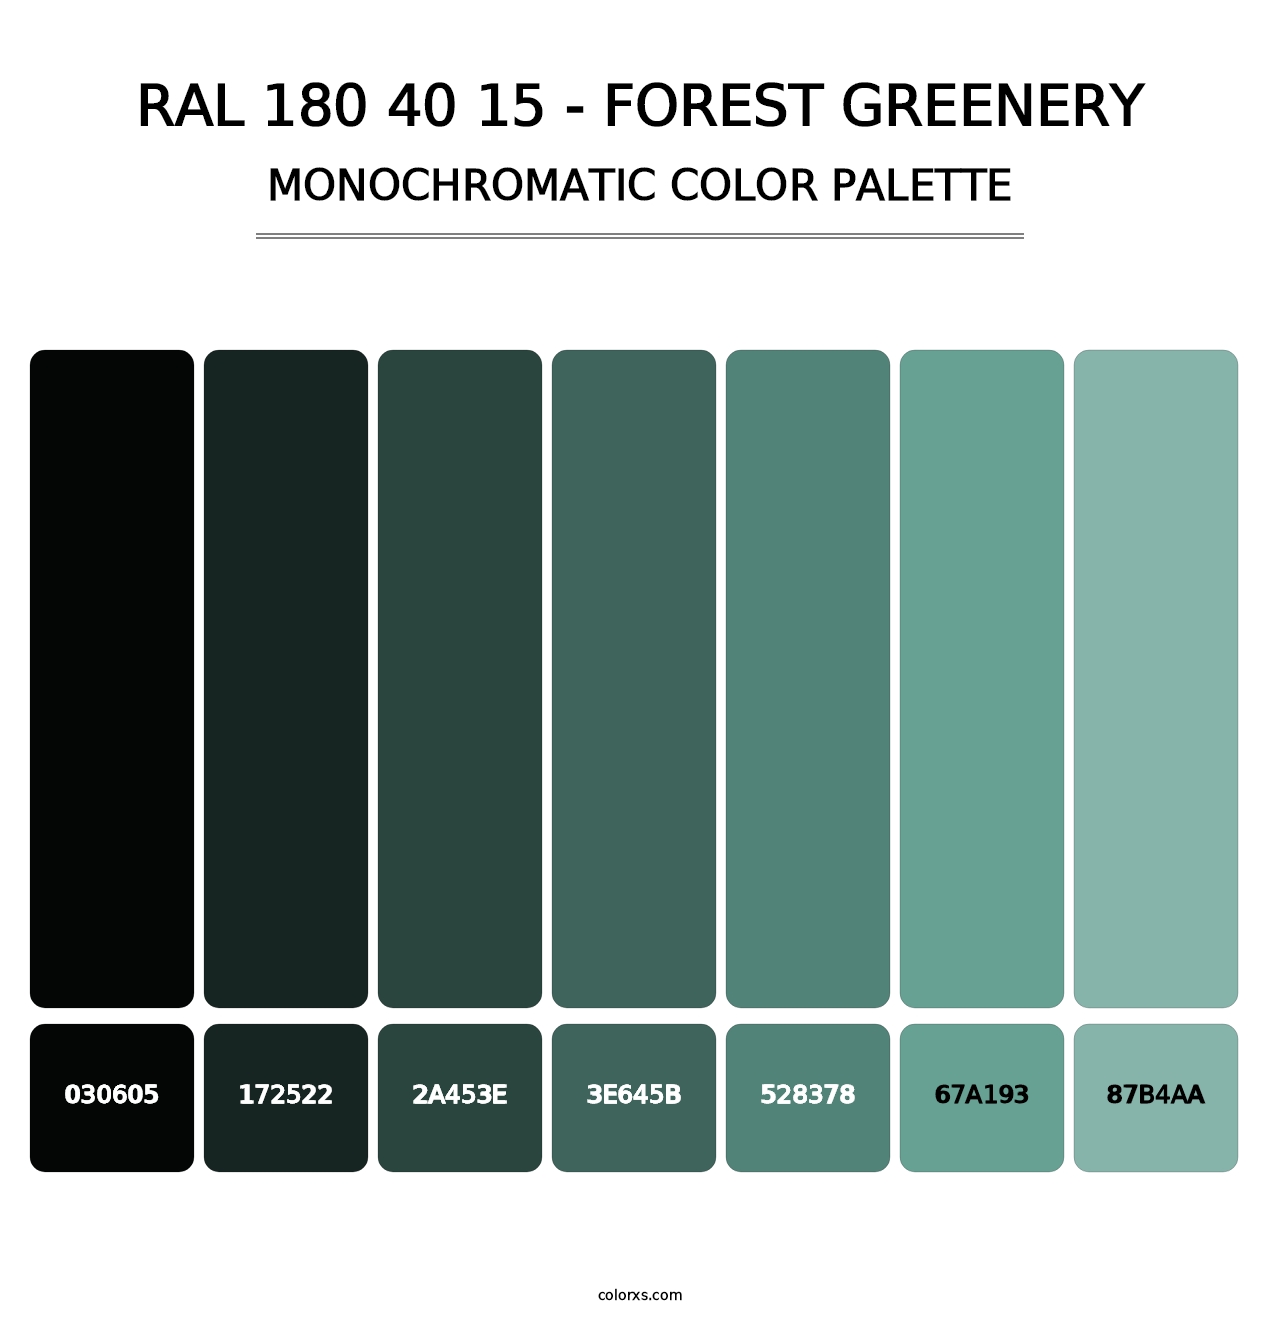 RAL 180 40 15 - Forest Greenery - Monochromatic Color Palette